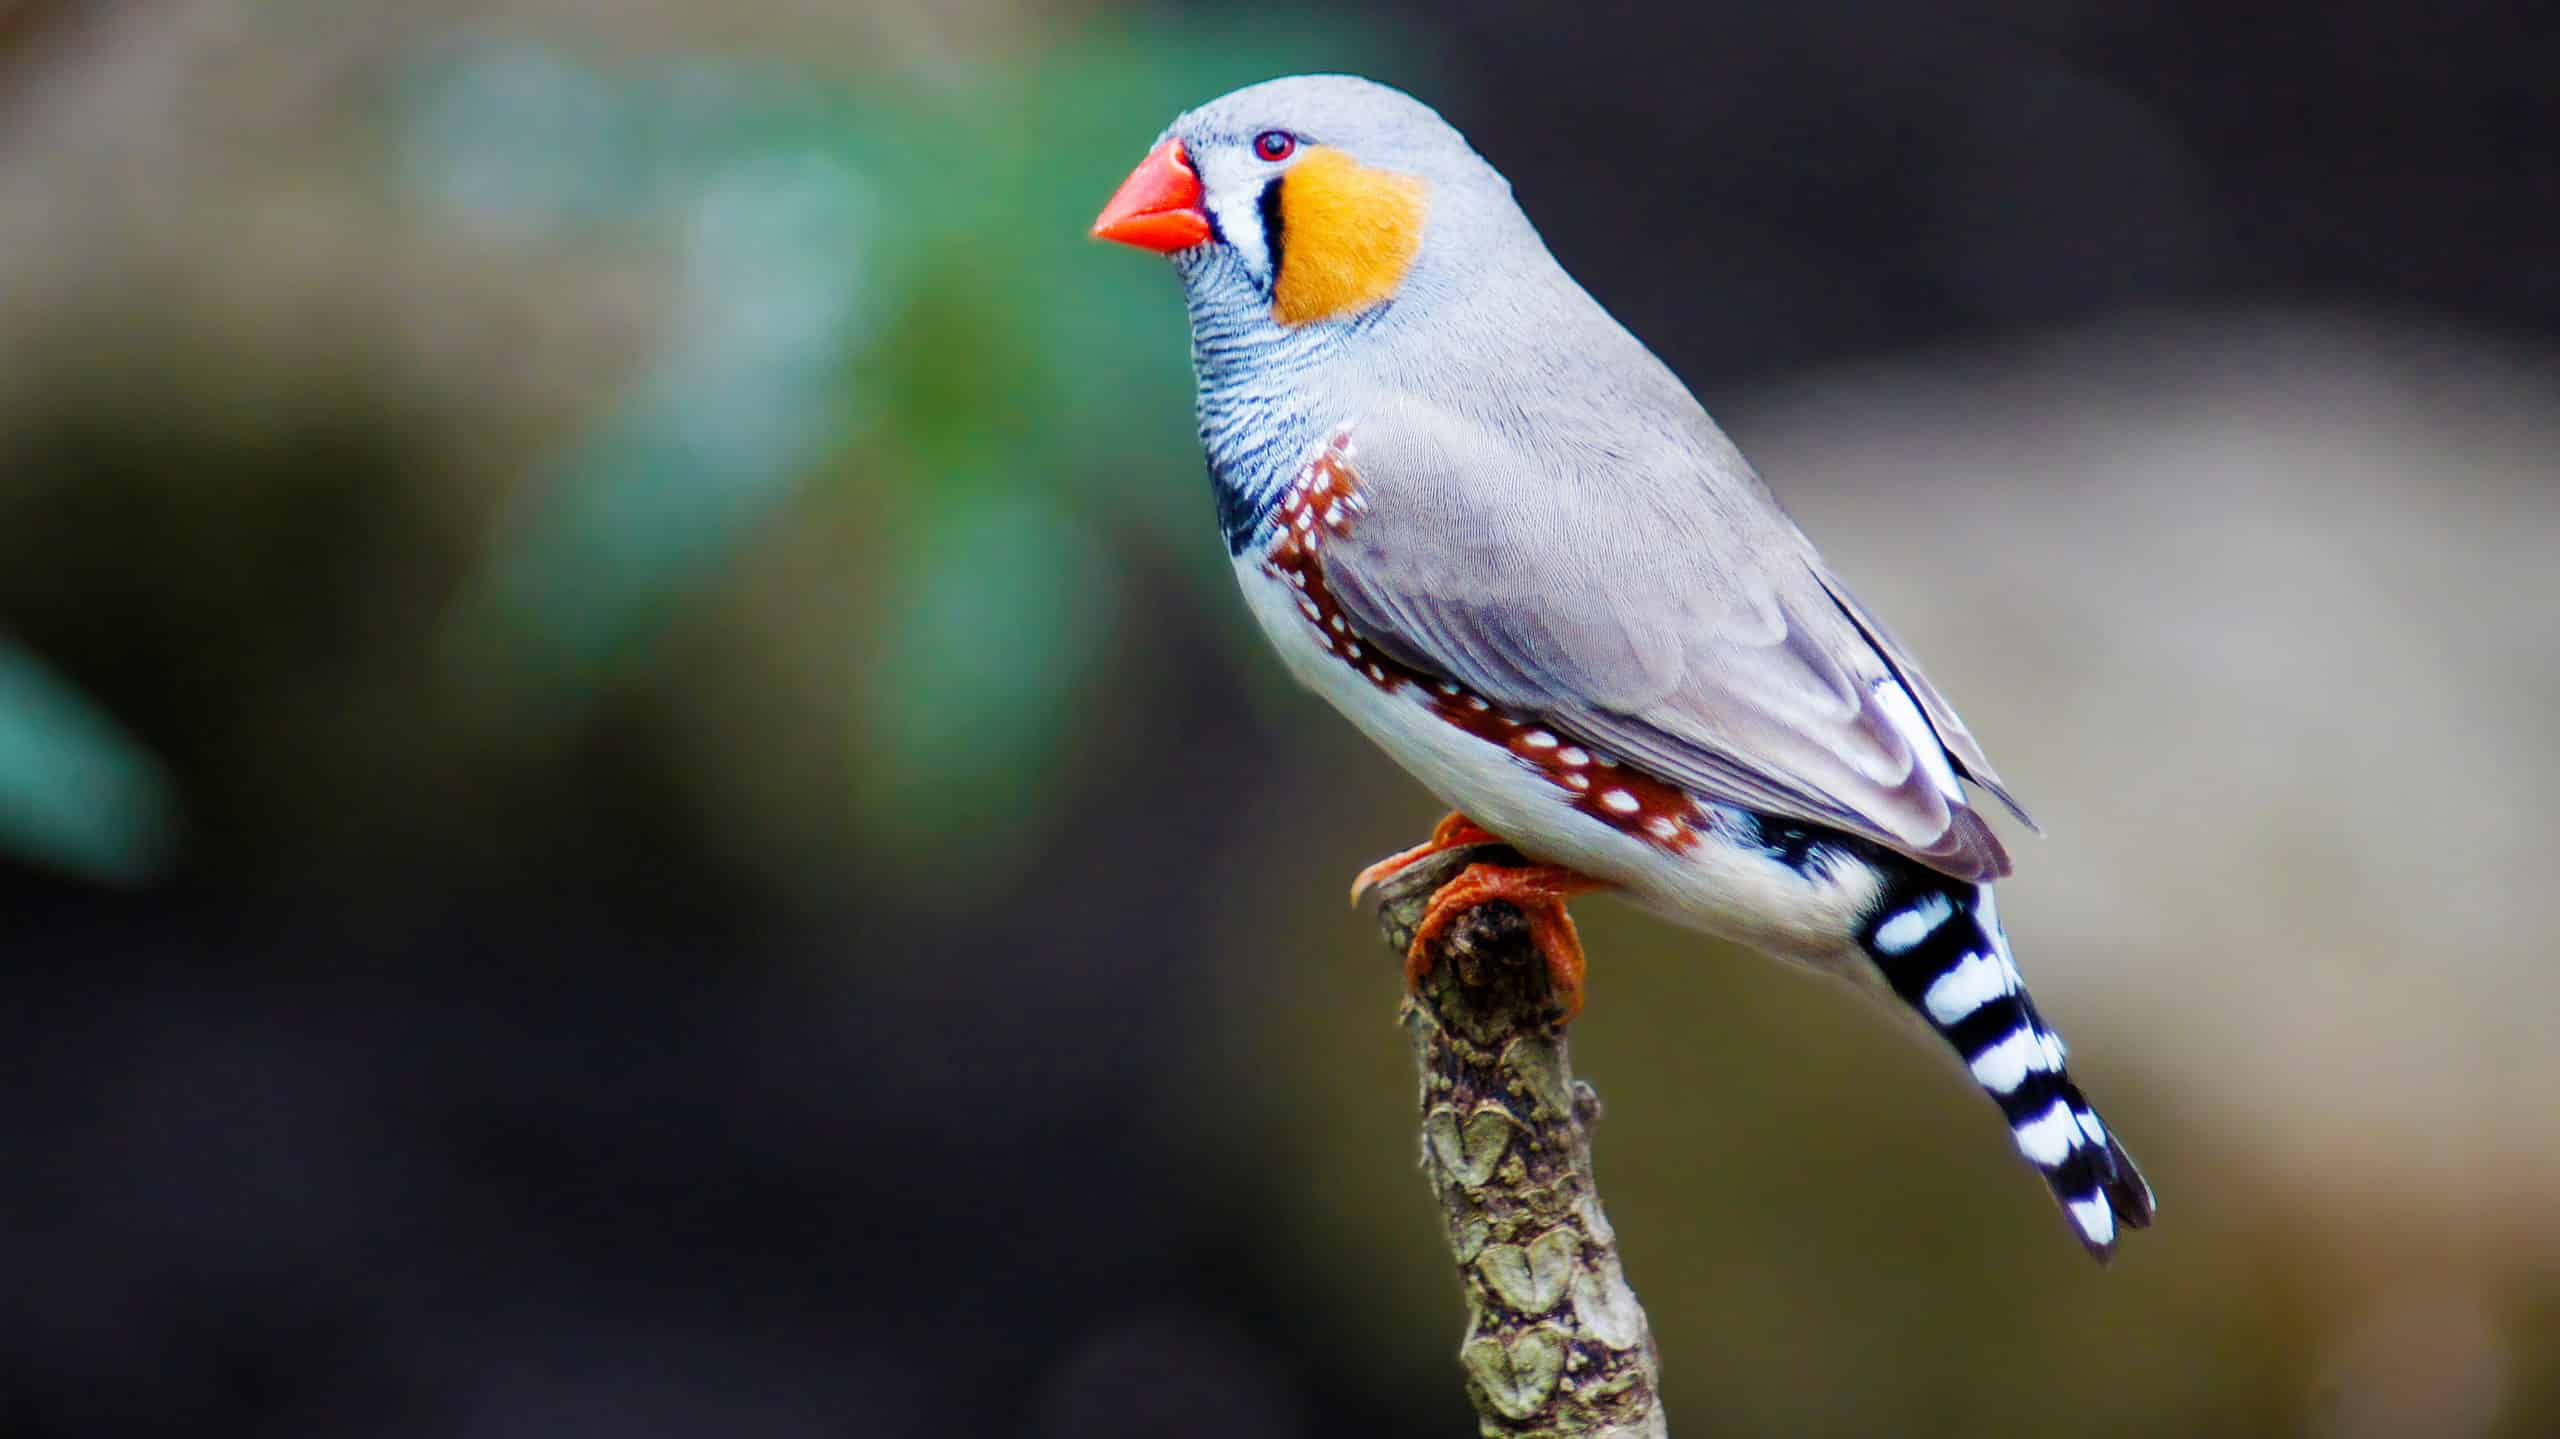 Close up shot of a zebra finch perched on a branch